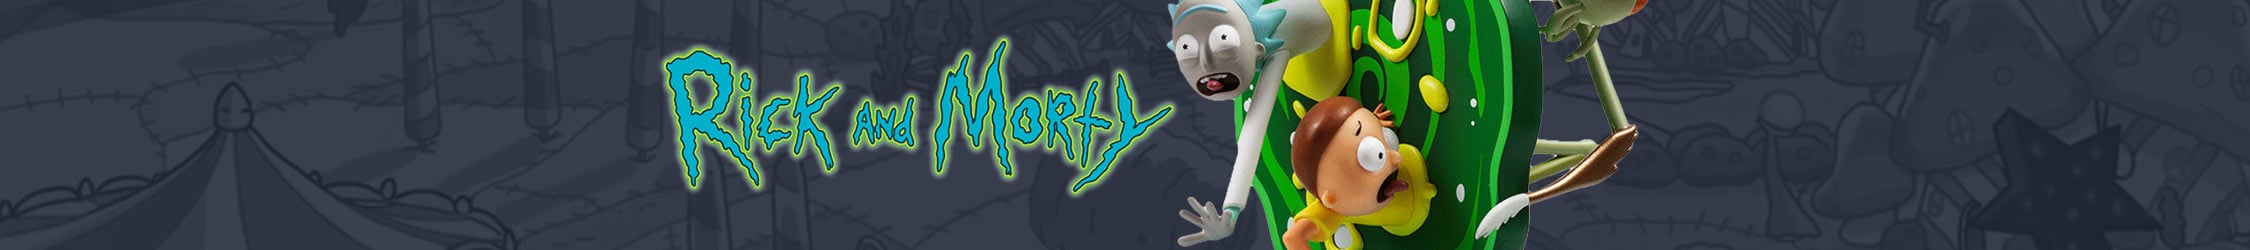 Rick and Morty Toys, Plush, Action Figures, Statues, & Collectibles